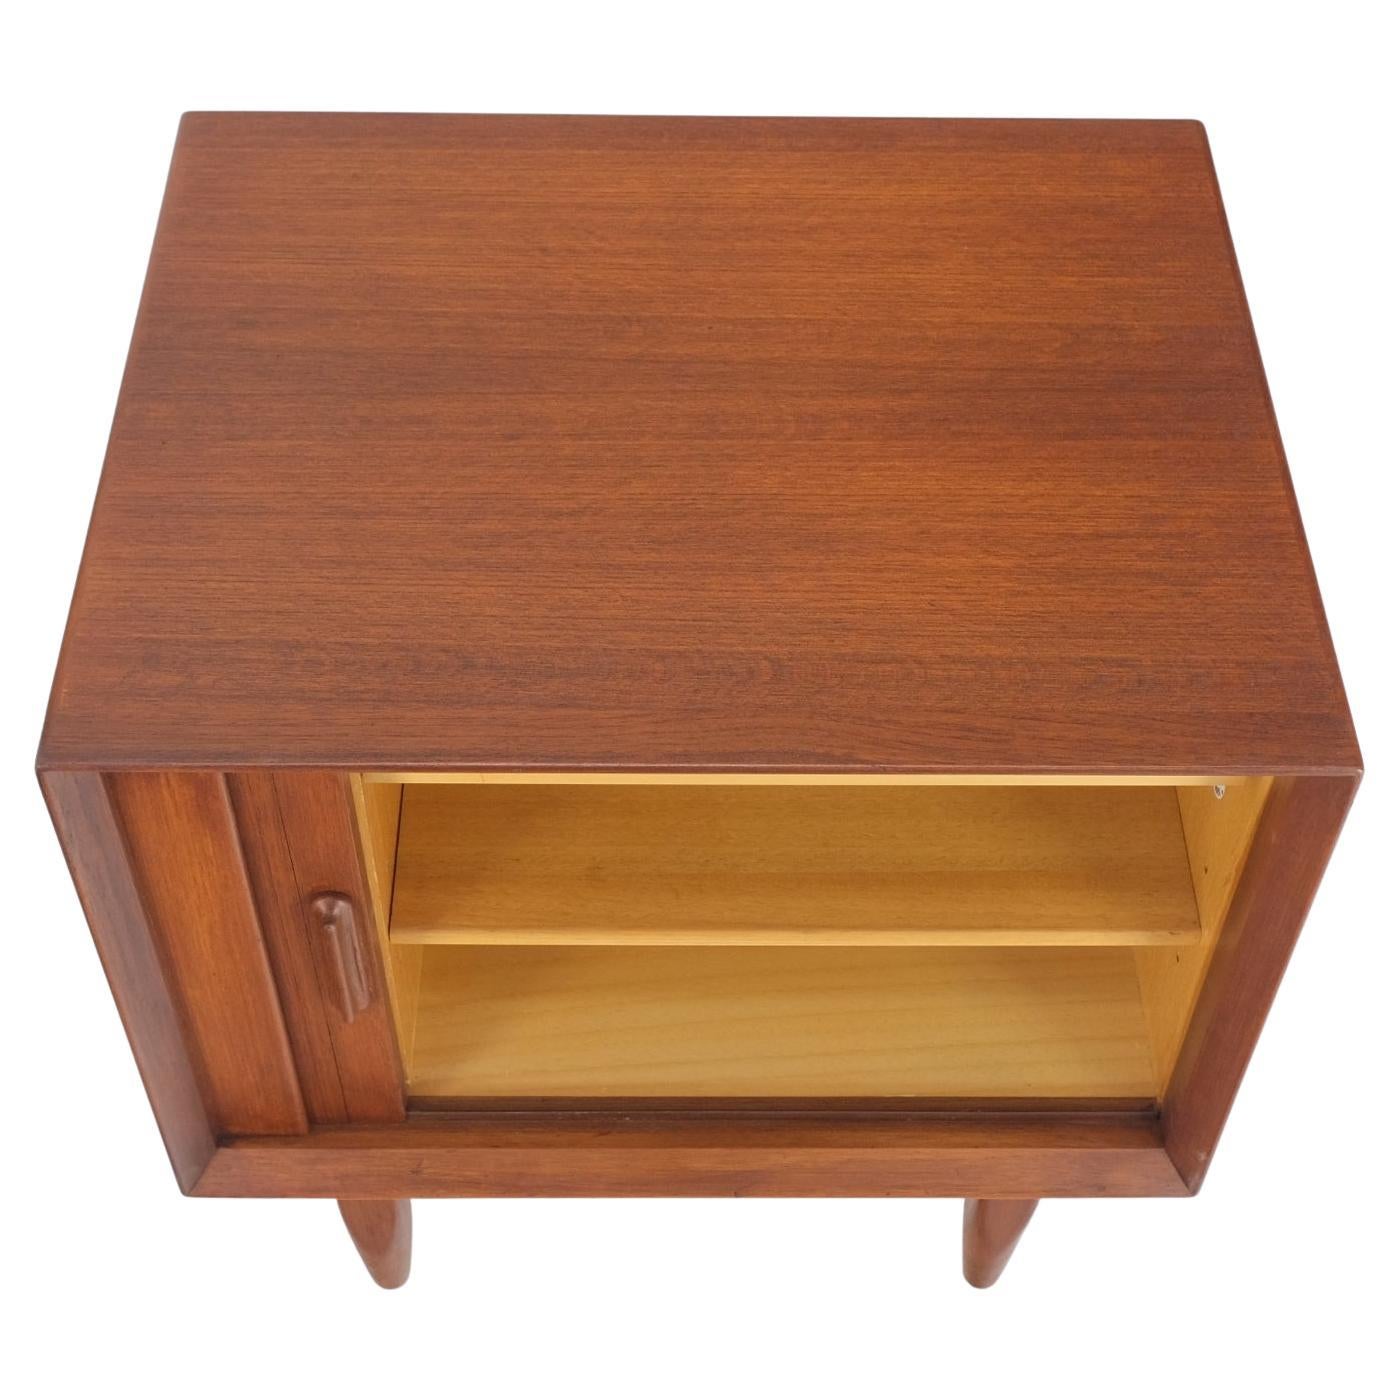 20th Century Danish Mid-Century Modern Teak Side End Table Night Stand Tambour Doors Falster For Sale